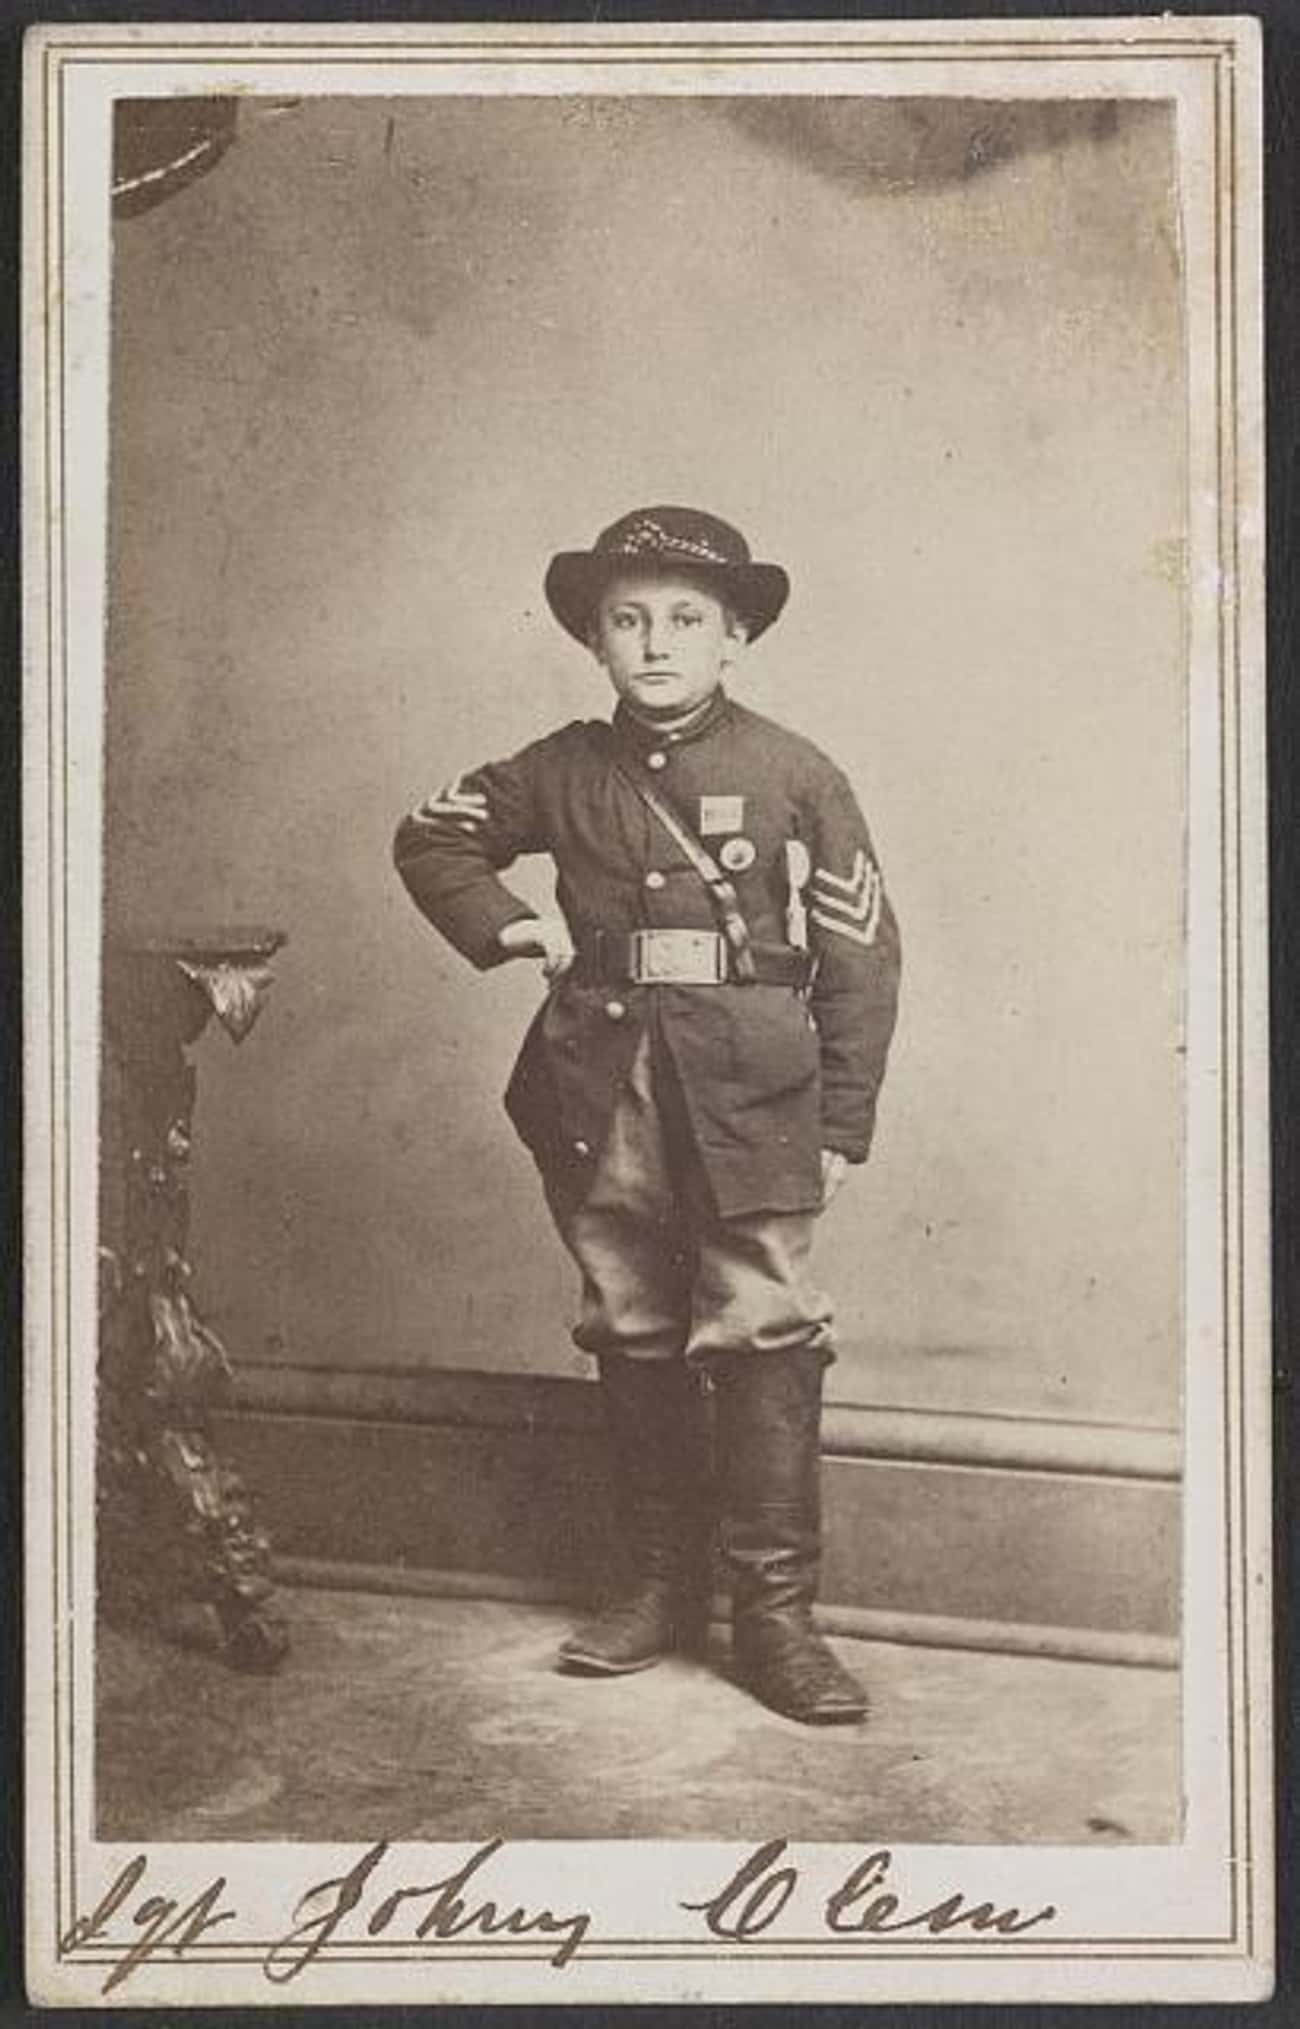 Sgt. Johnny Clem In 1863 At About Age 12